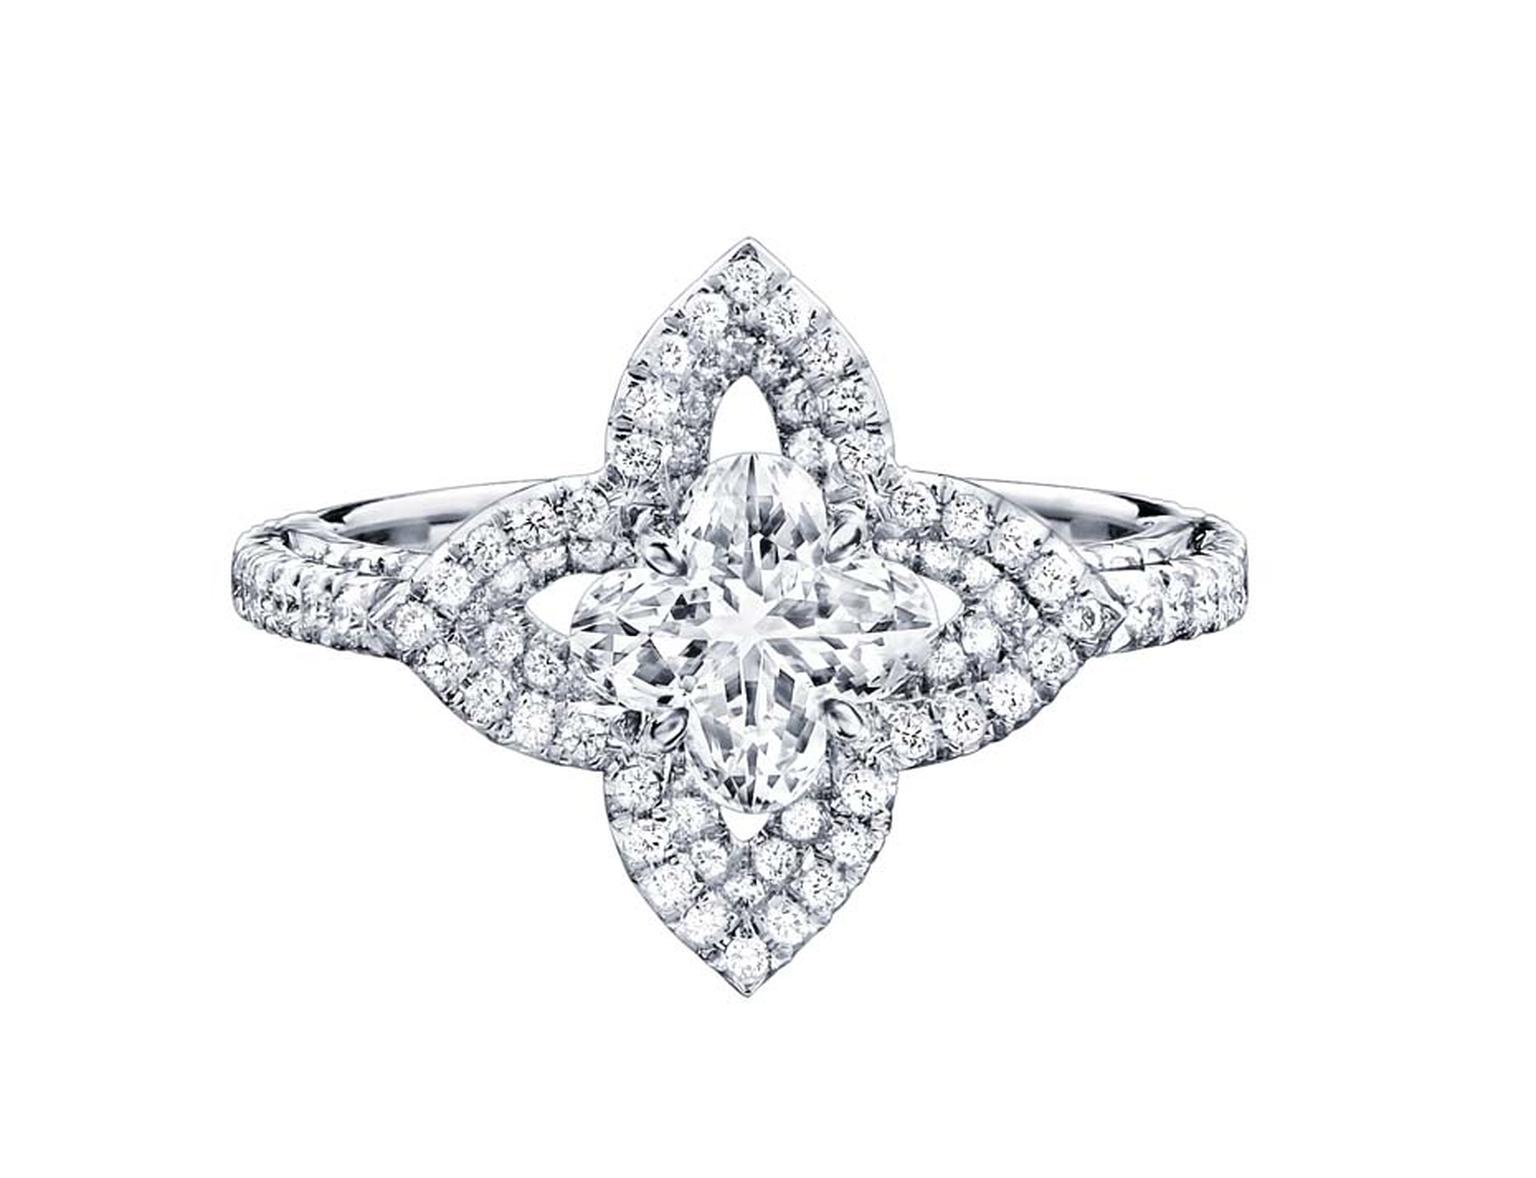 Solitaire diamond ring from the Monogram Fusion collection,